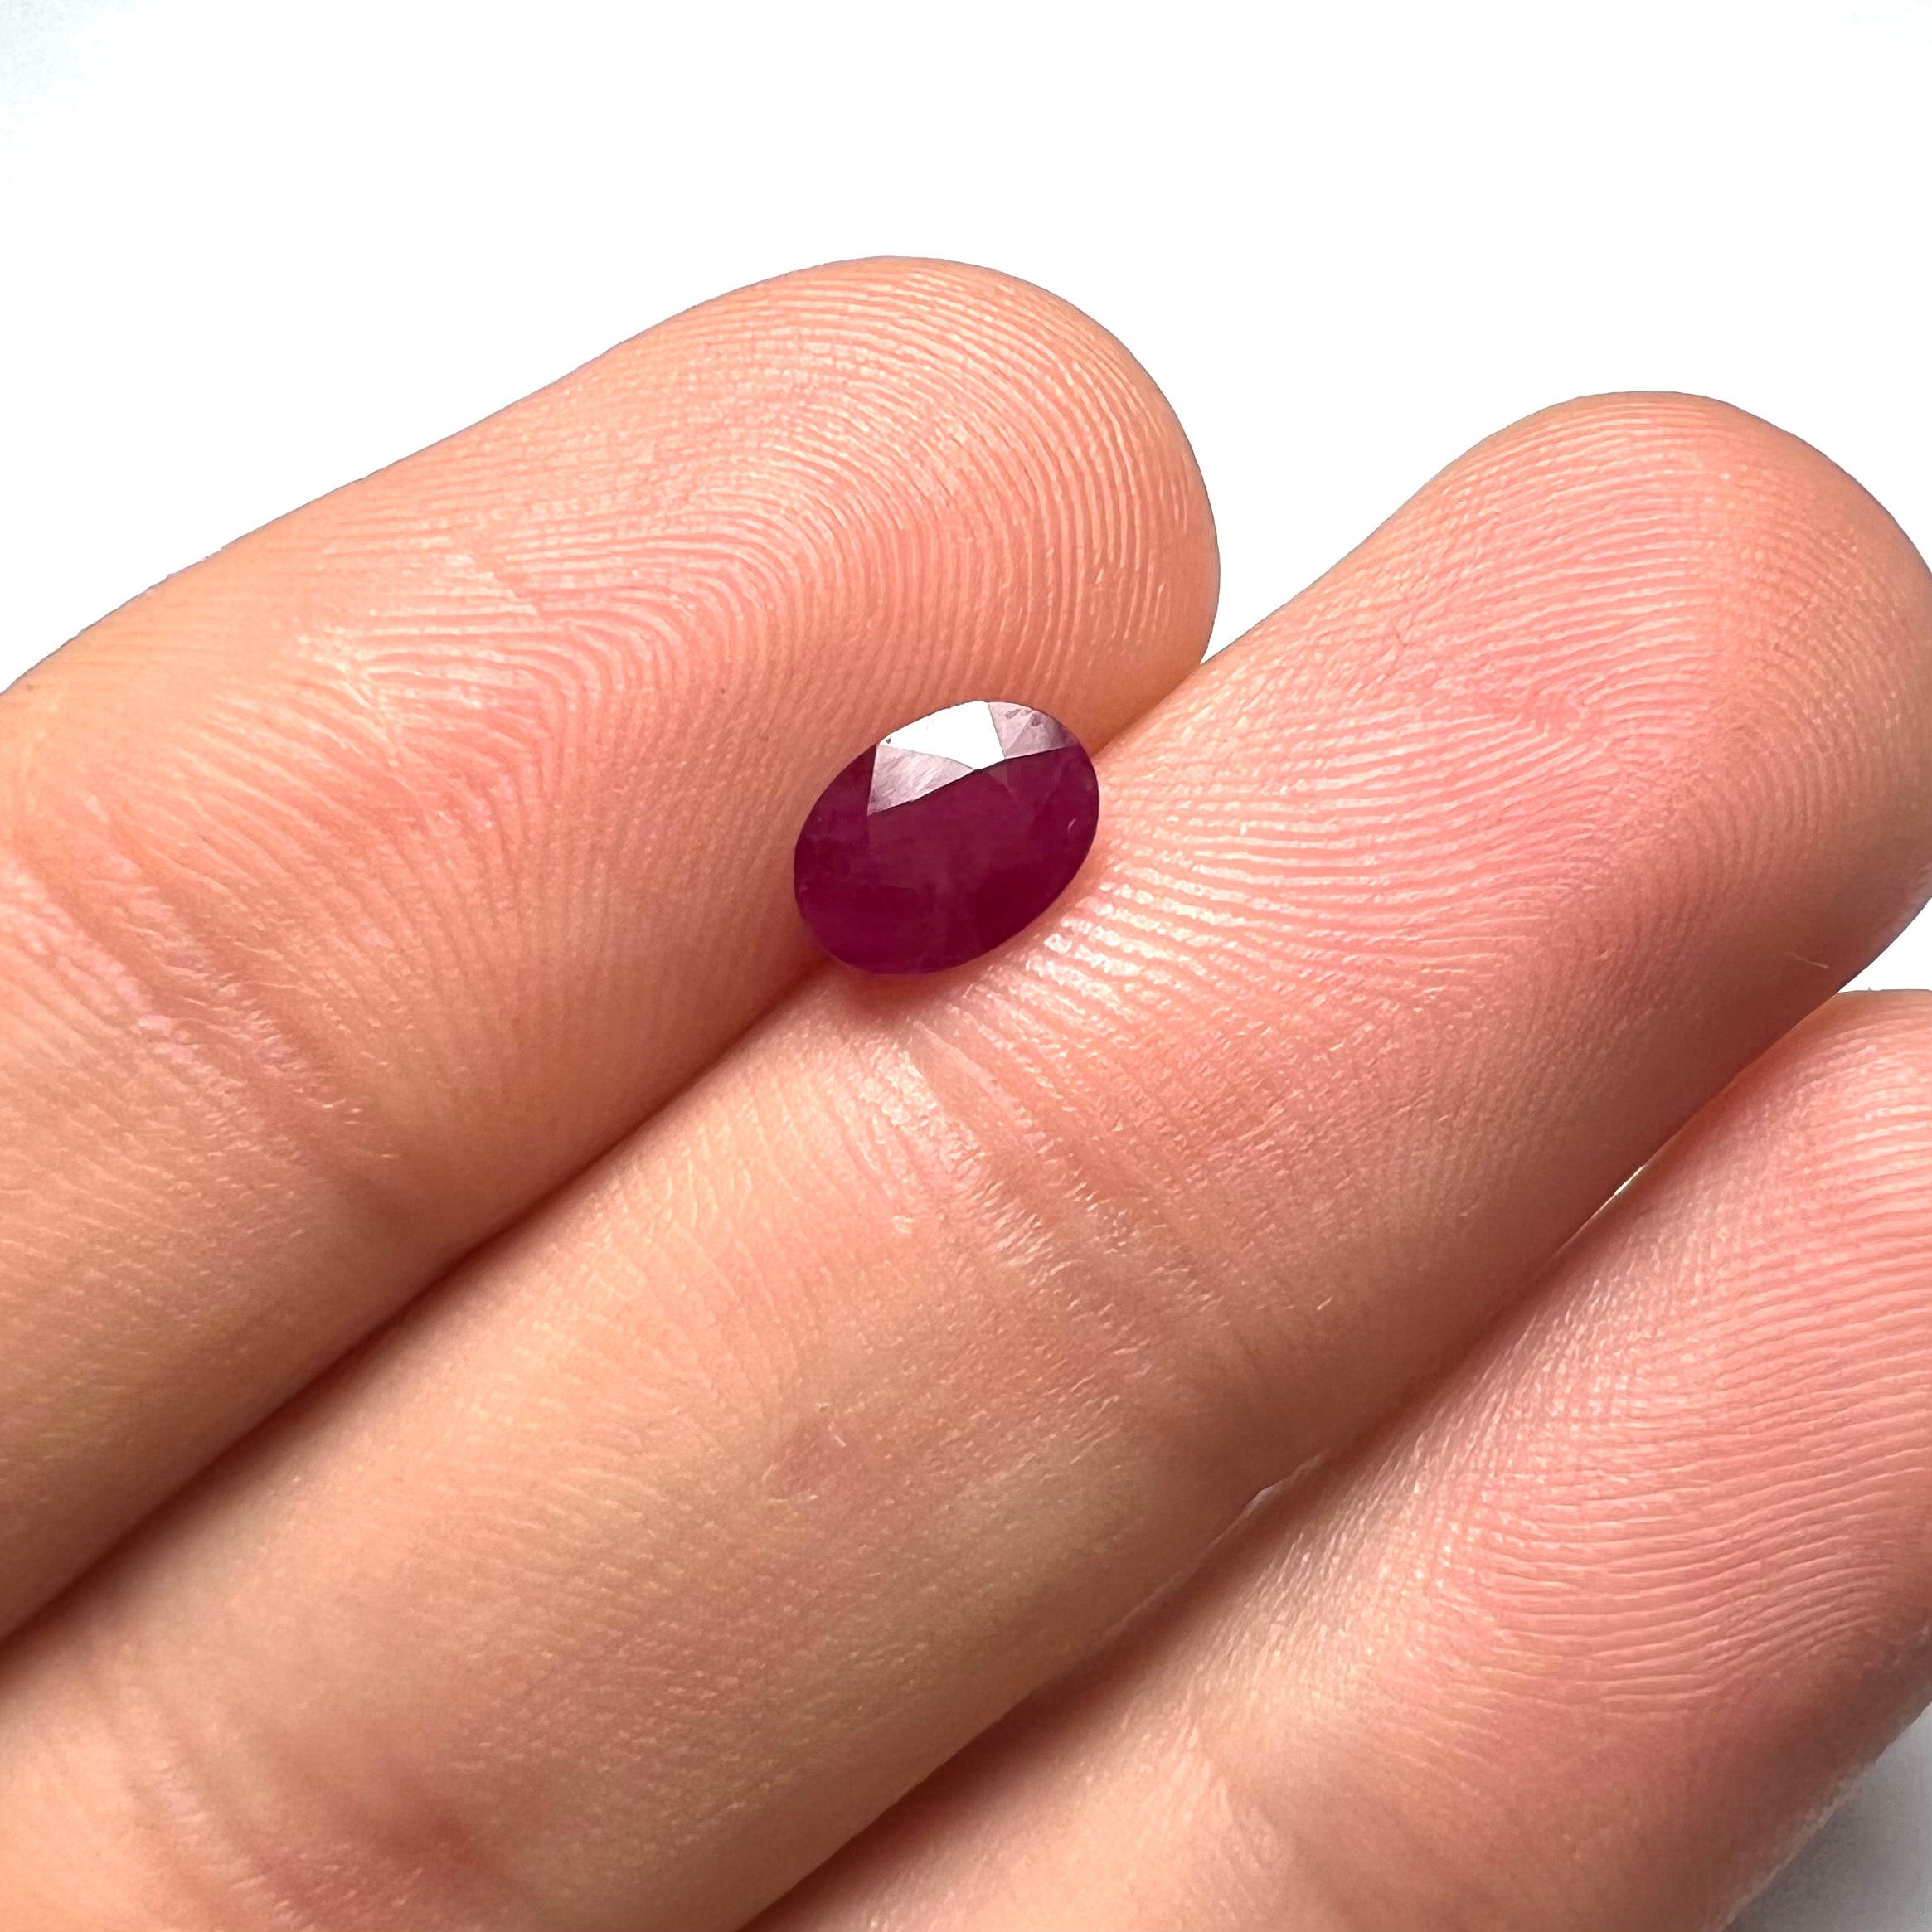 1.12CTW Loose Natural Oval Ruby 7x5x3mm Earth mined Gemstone